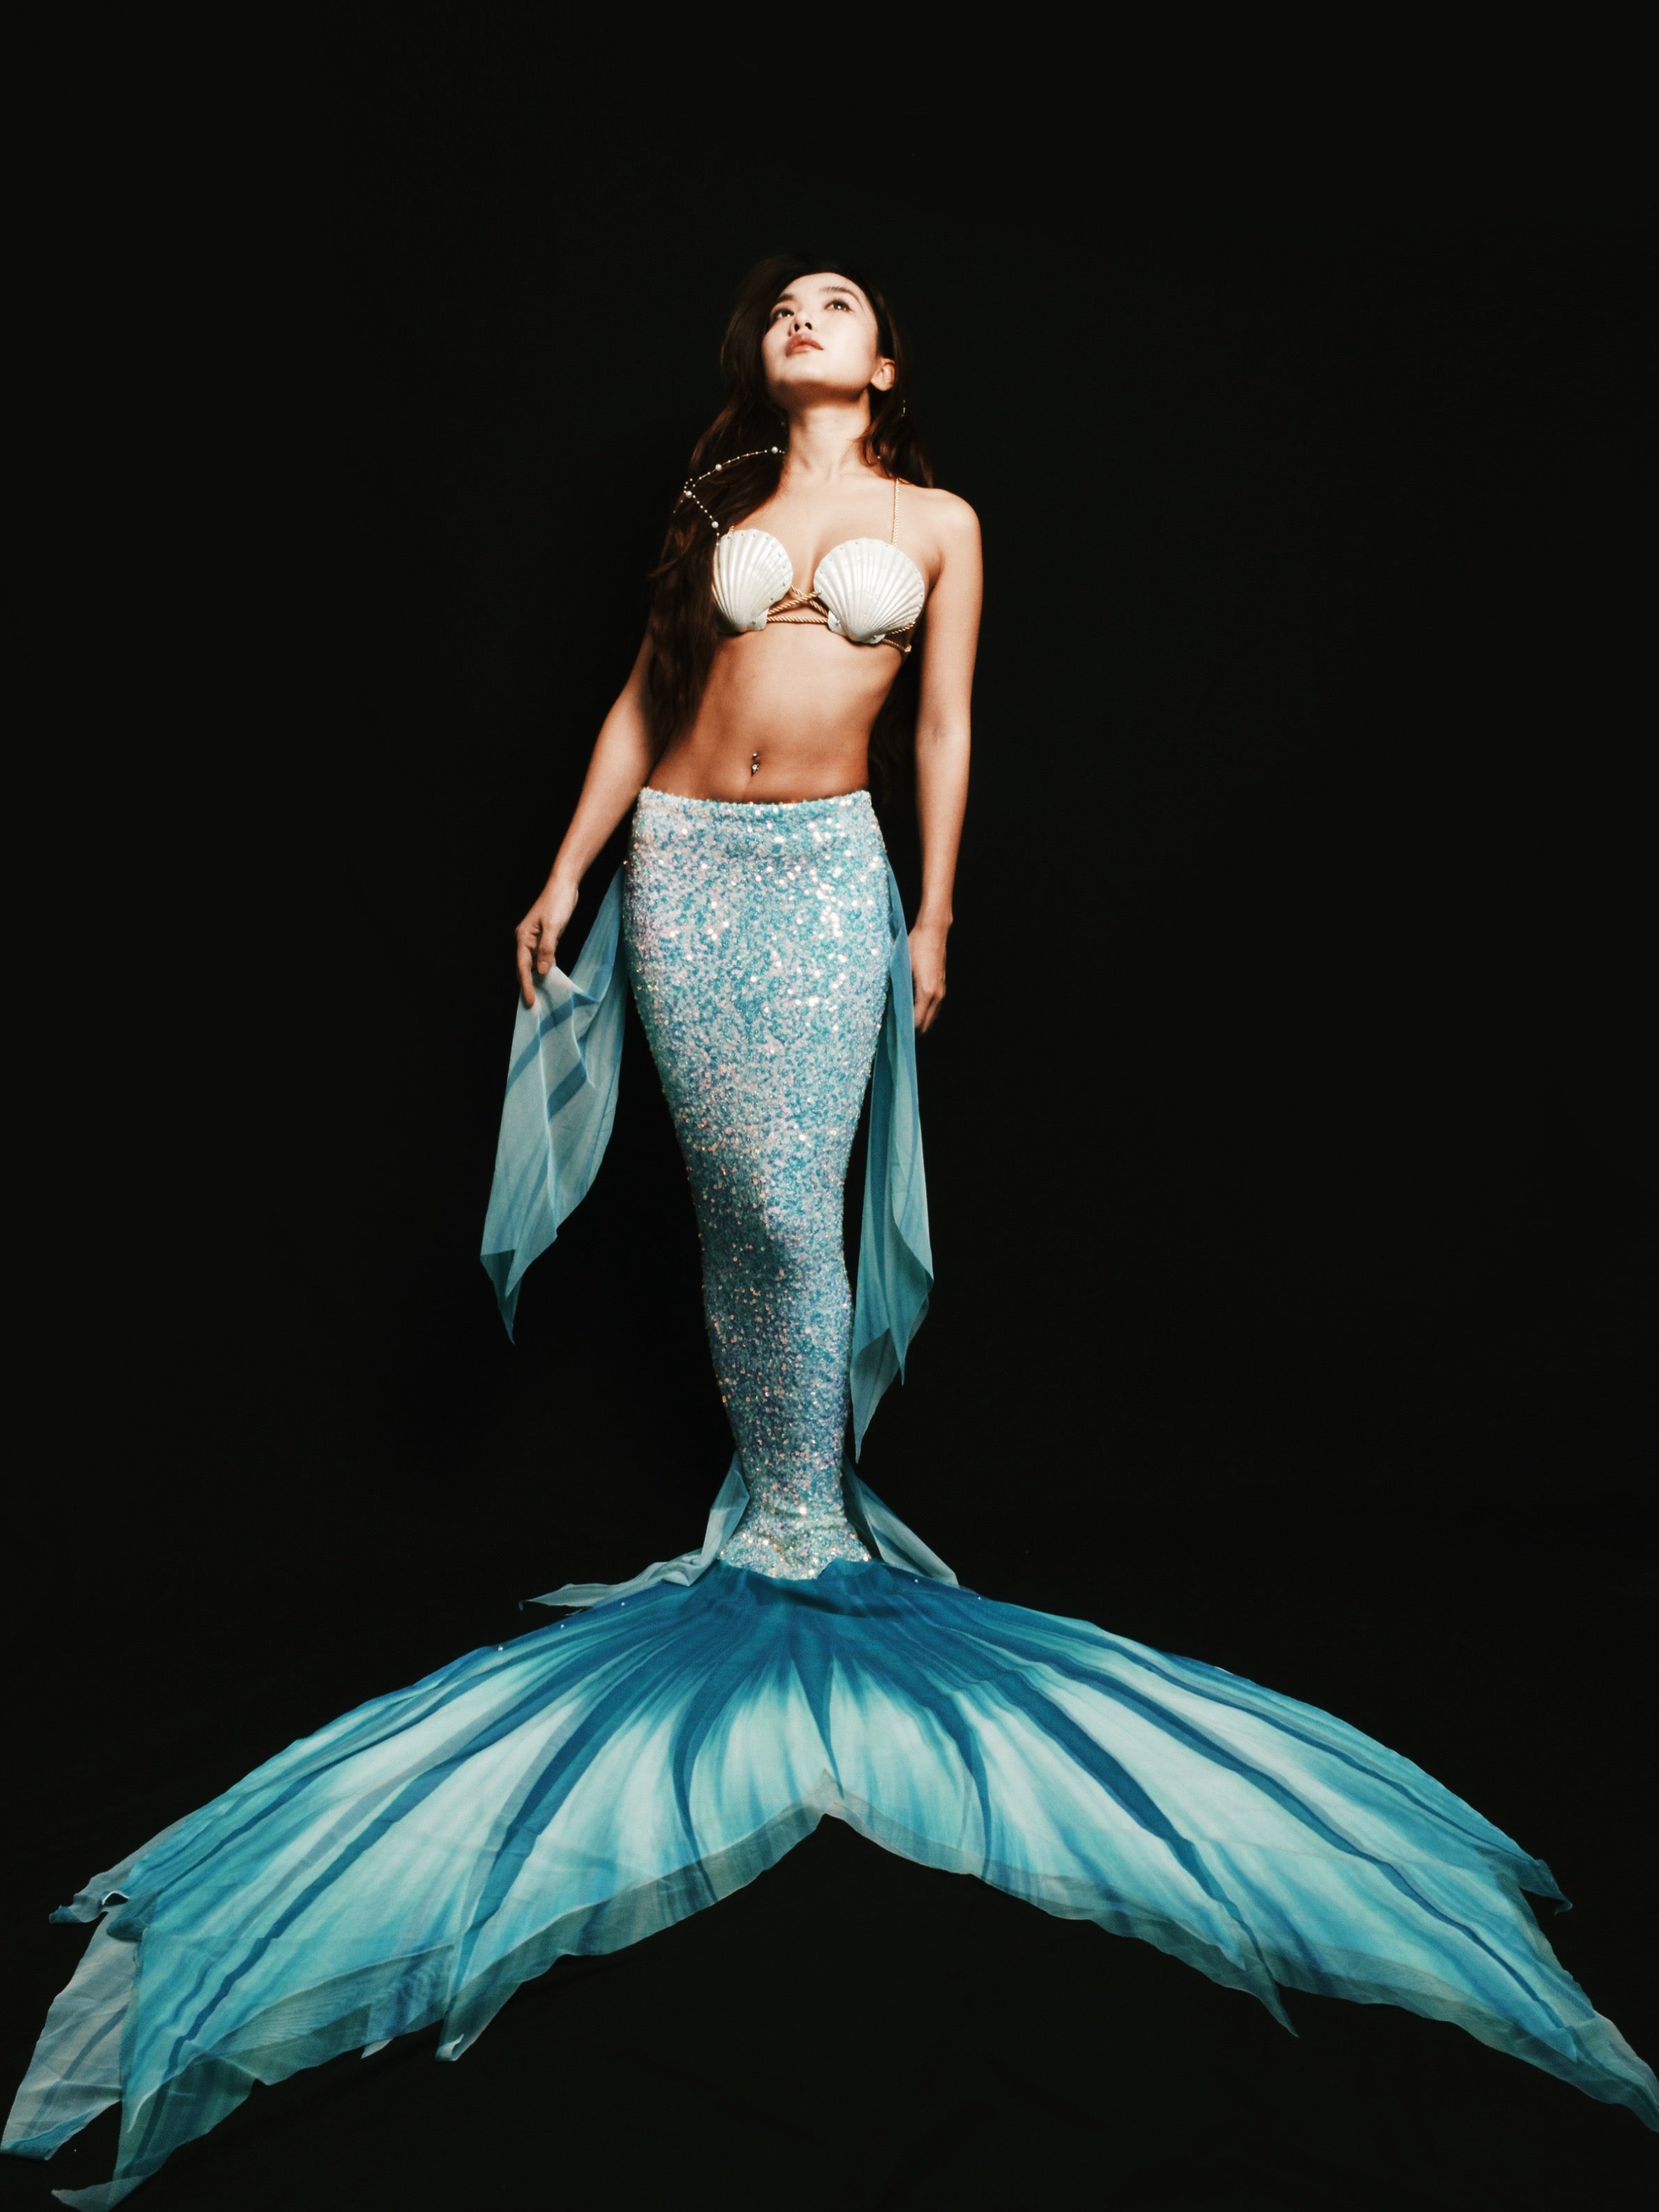 Mermaid tails for adults, cosplay costume, swimmable mermaid tails, mermaid tail swimwear, beach swimming, fabric mermaid tails, realistic mermaid tails, buy mermaid tails, shop mermaid tails, how to be a mermaid, transform to a mermaid, customize mermaid tails, professional mermaid tails, mermaid tails for sale, sequin mermaid tails